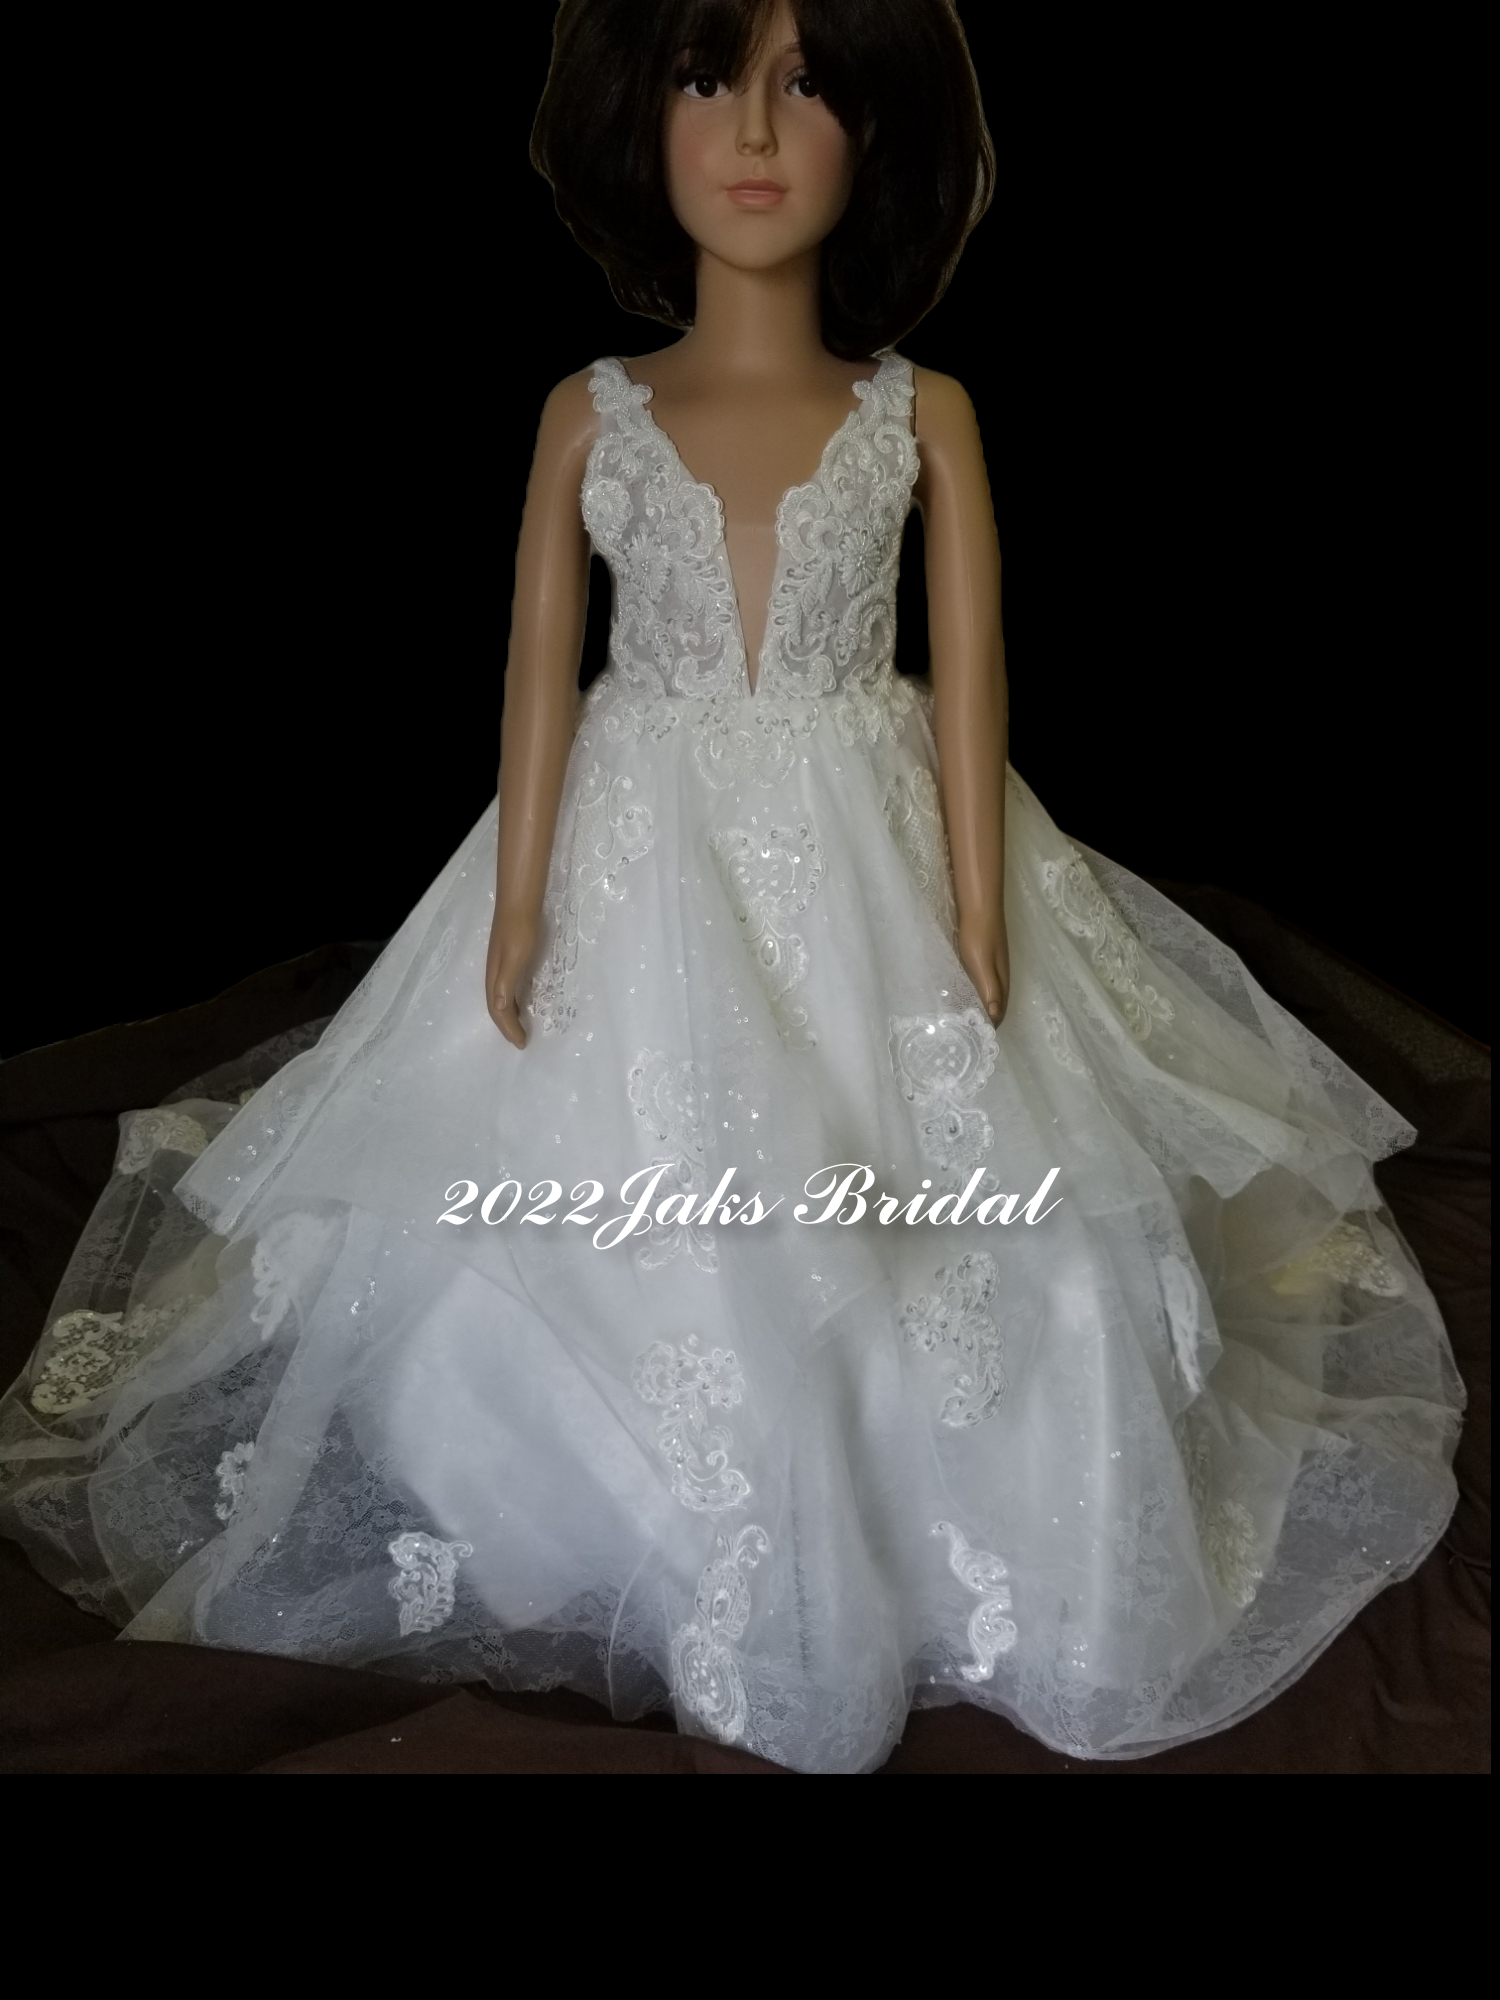 Little girls wedding dress with hand beaded crystals and pearls adds elegant sparkle to the bold ball gown of this designer flower girl dress. 